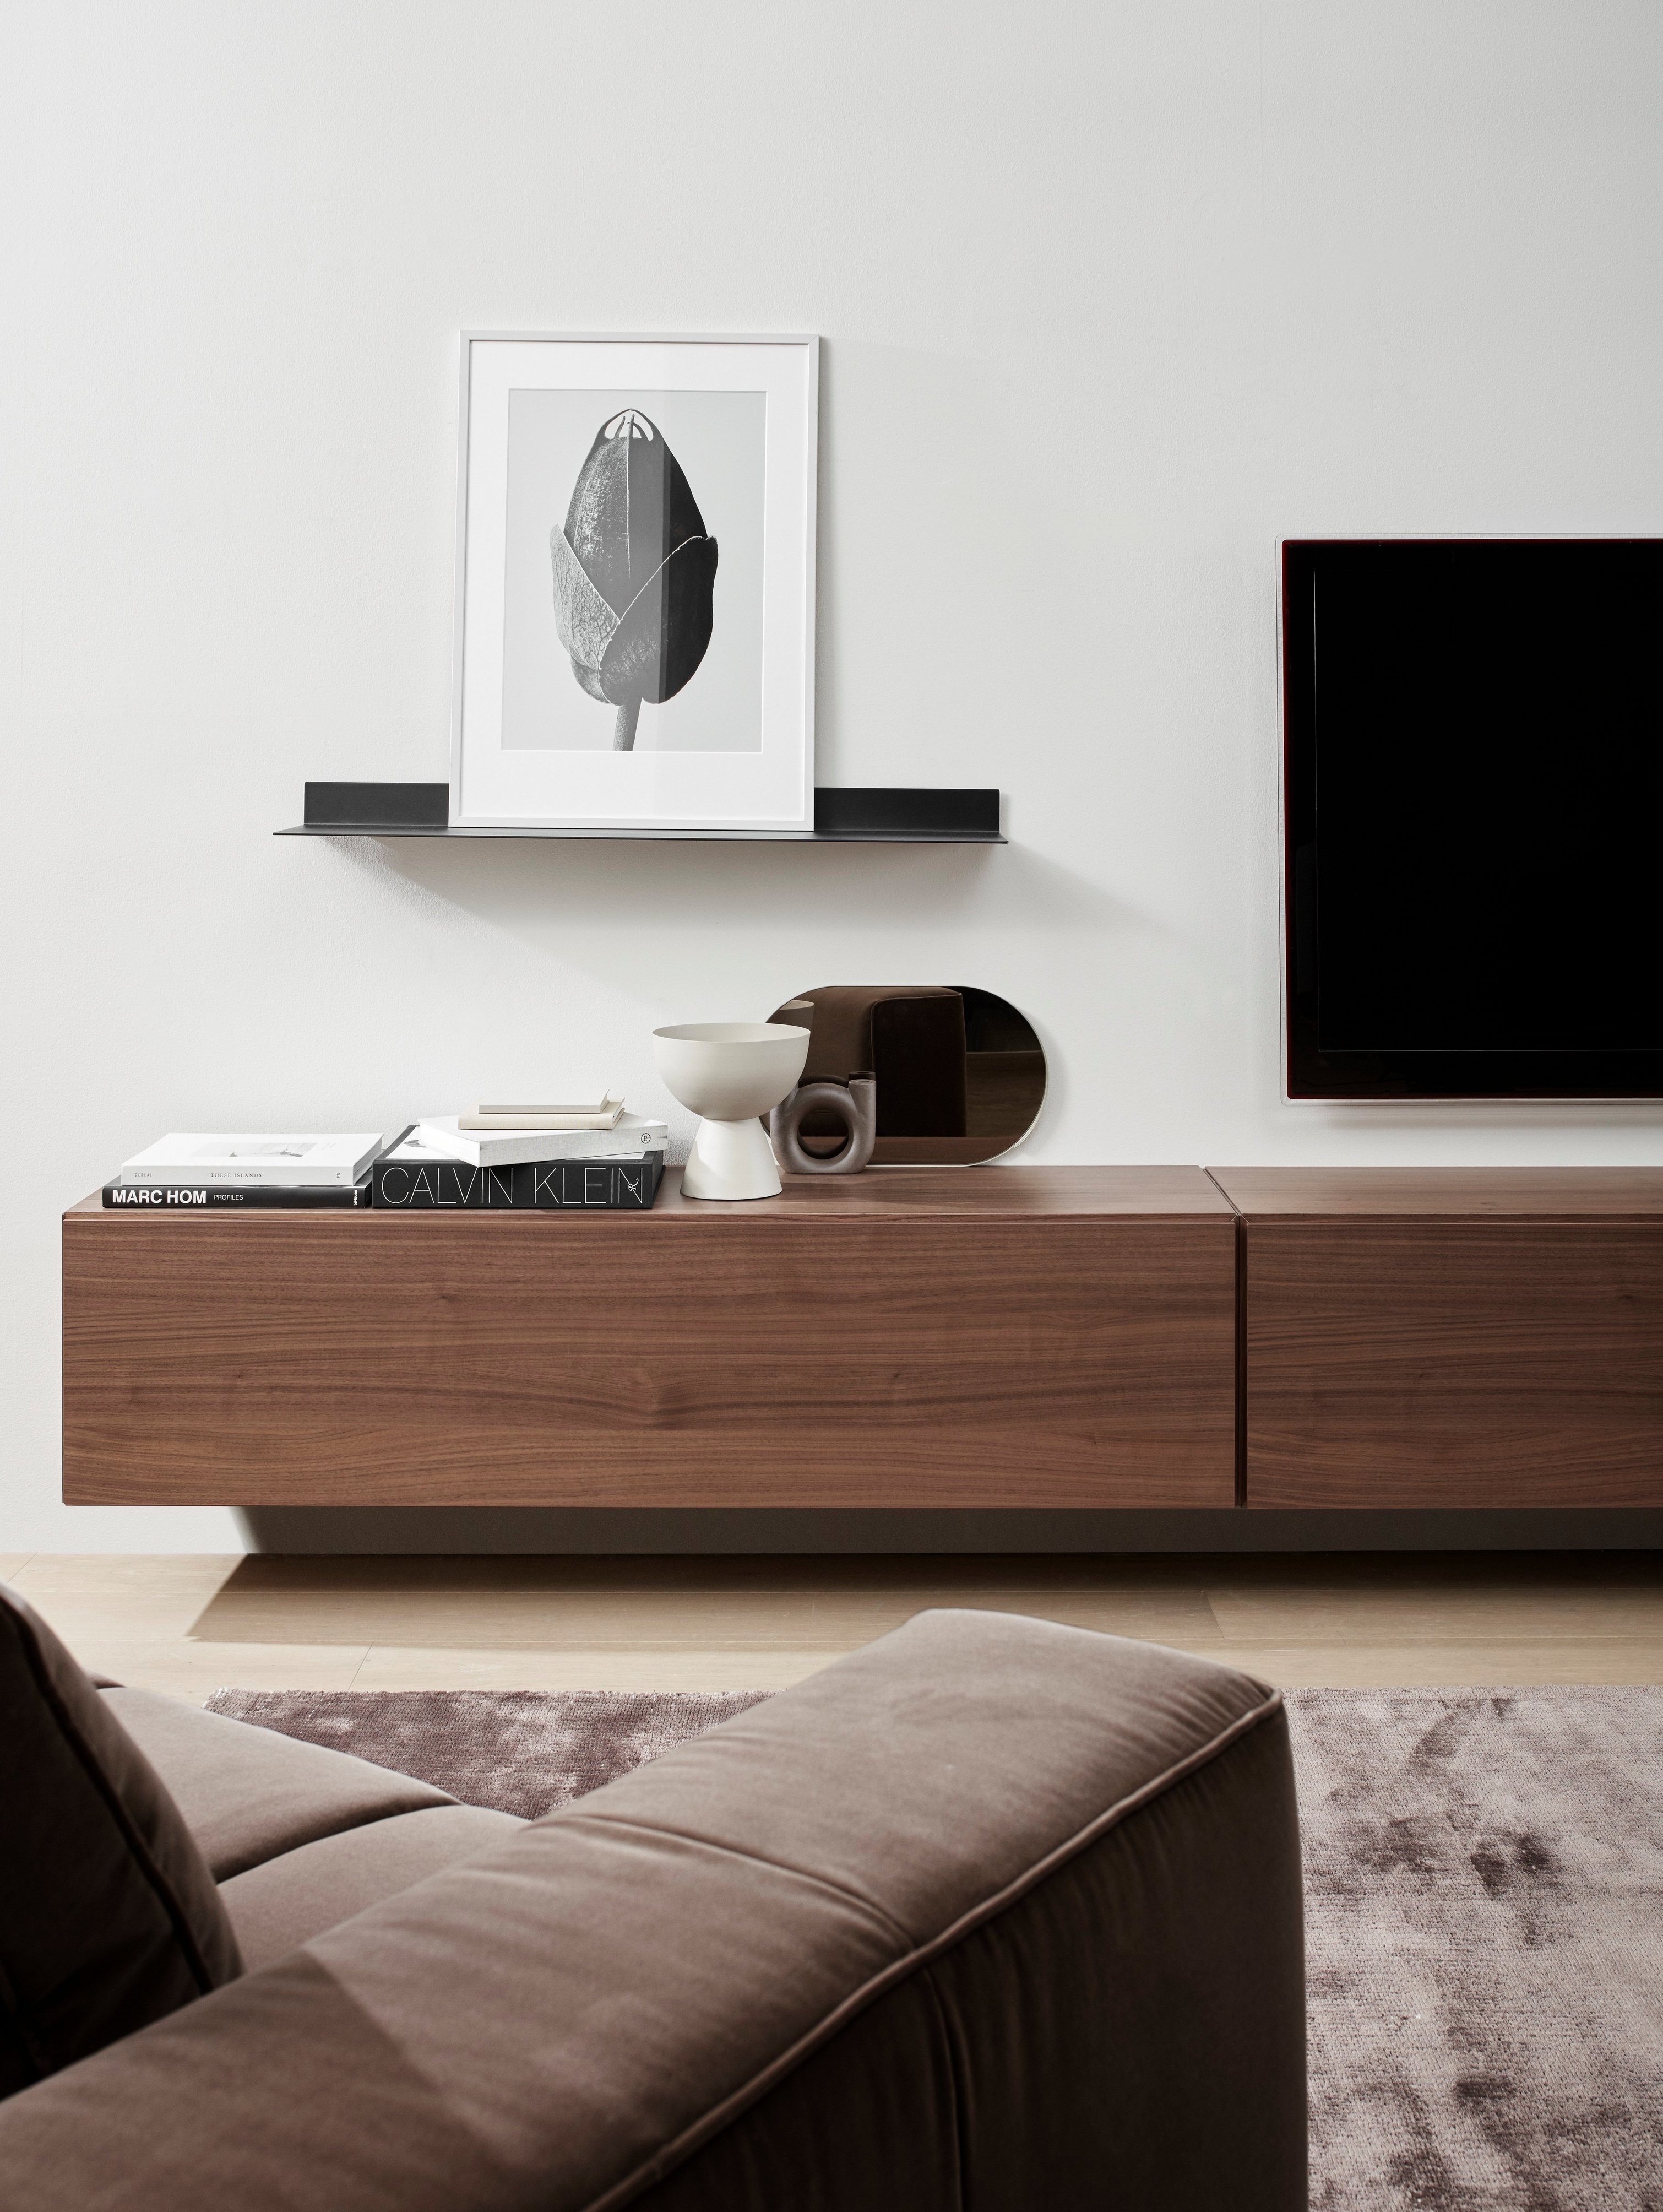 Minimalist living room detail with a brown sofa, wooden media unit, abstract art, and modern decor.